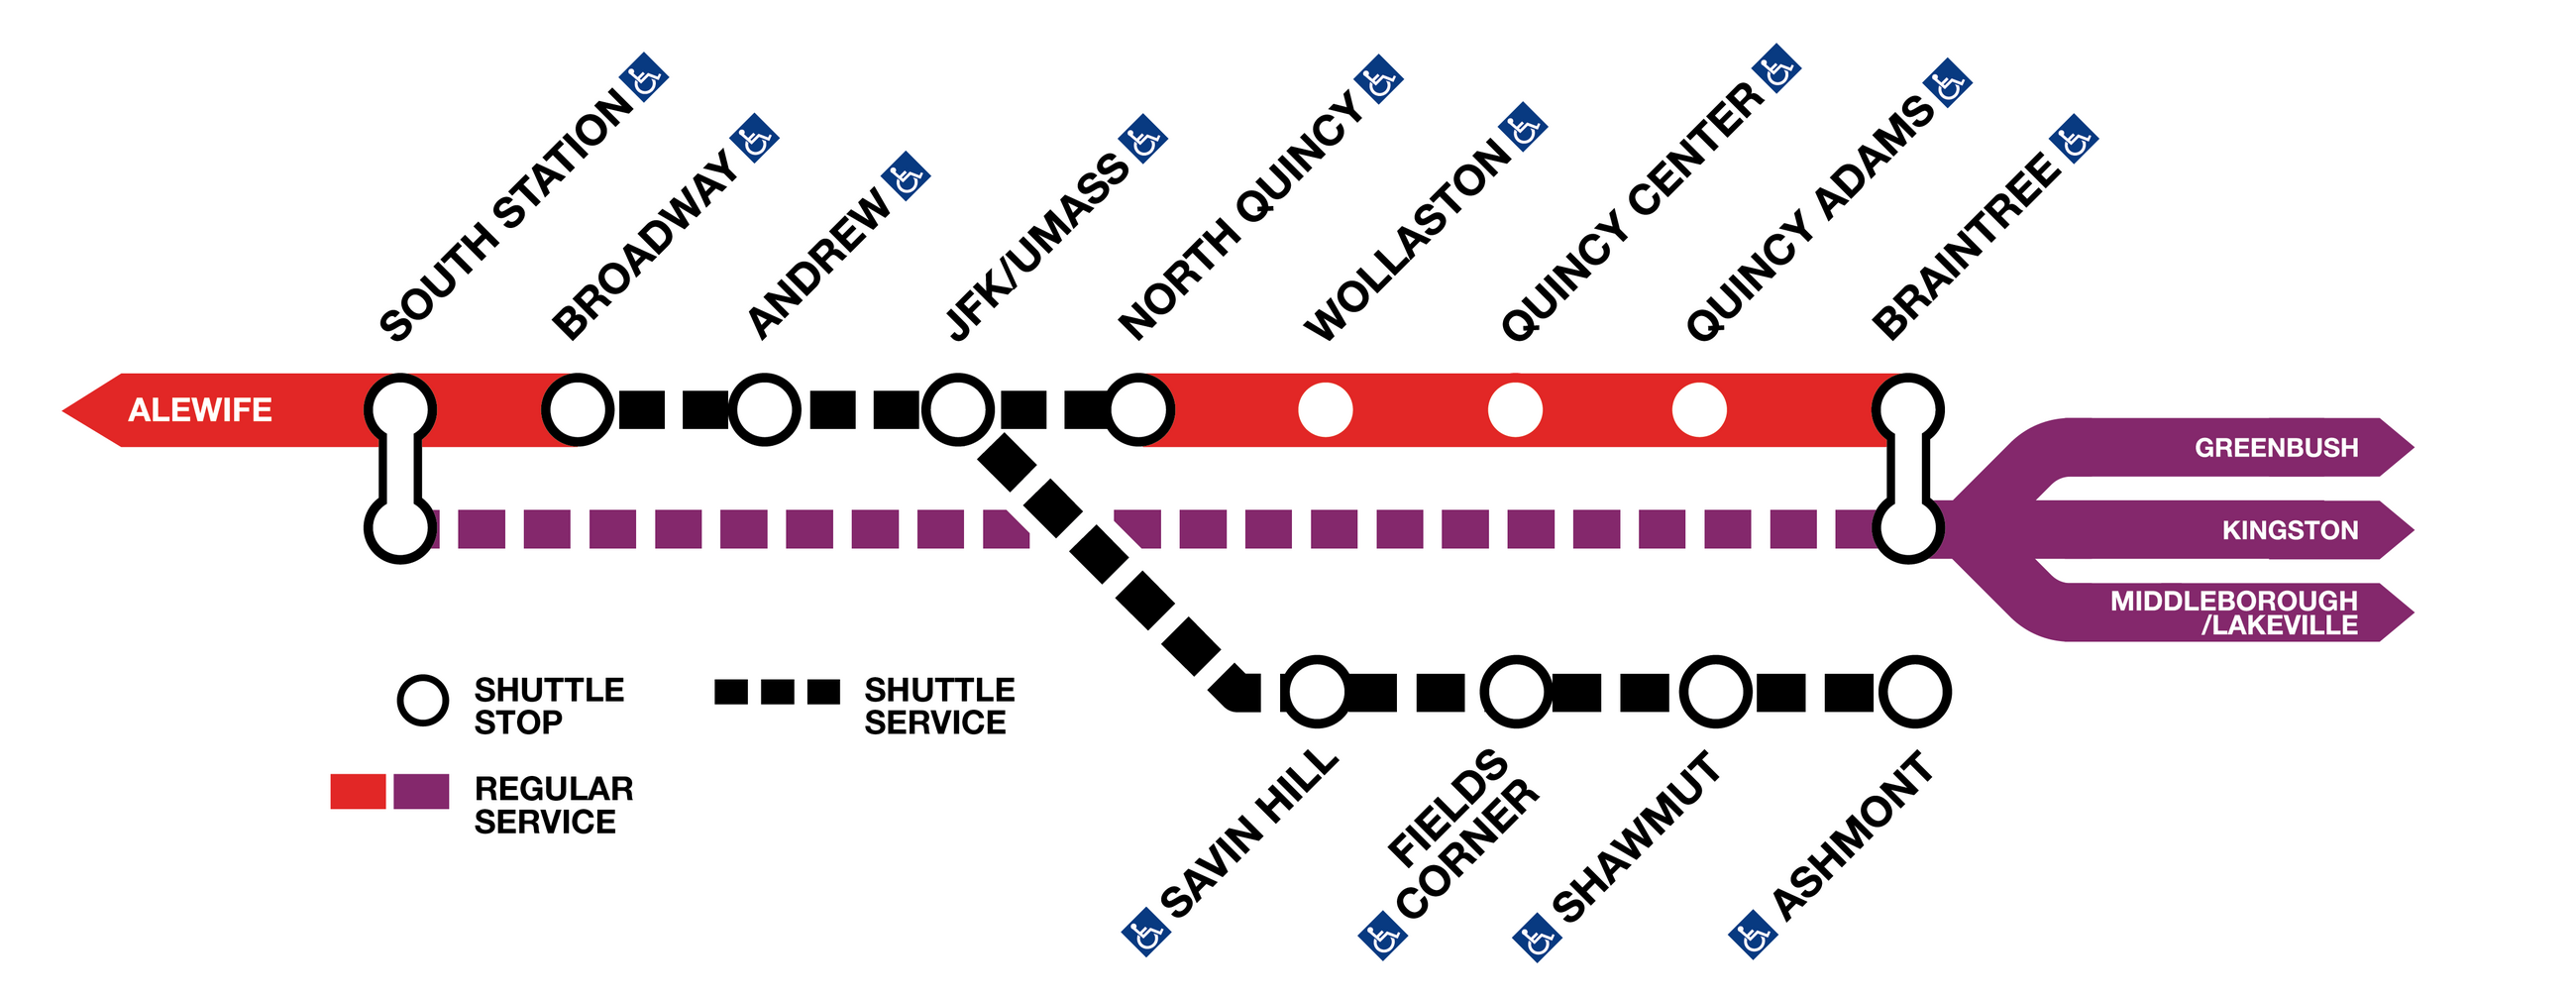 diversion diagram showing alternative Red Line options during upcoming disruptions in March and April. Dotted lines indicate planned shuttle buses to replace subway service between Broadway and N. Quincy on the Braintree branch, and between Broadway and Ashmont on the Ashmont branch.